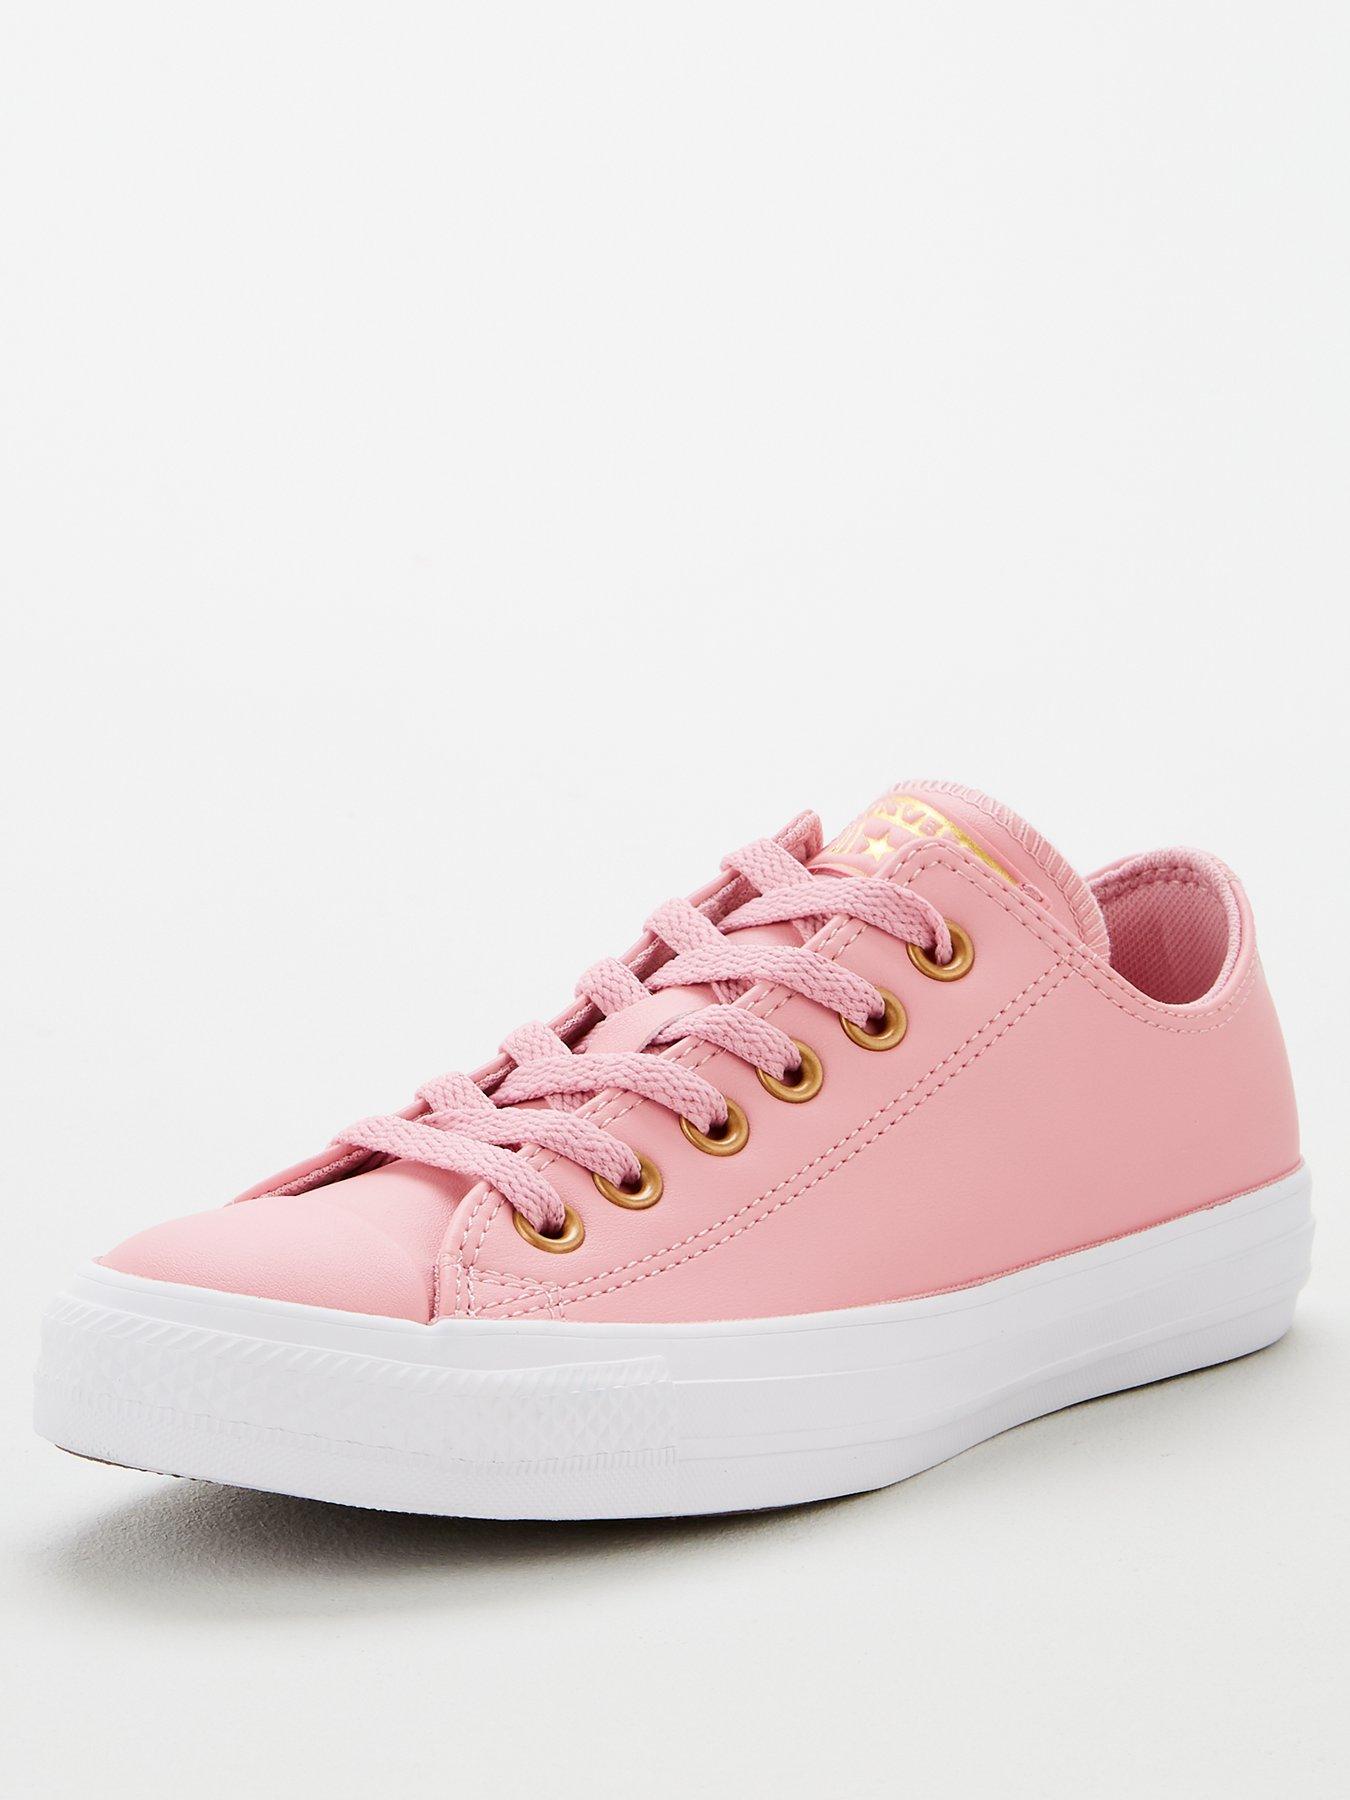 converse all star pink leather